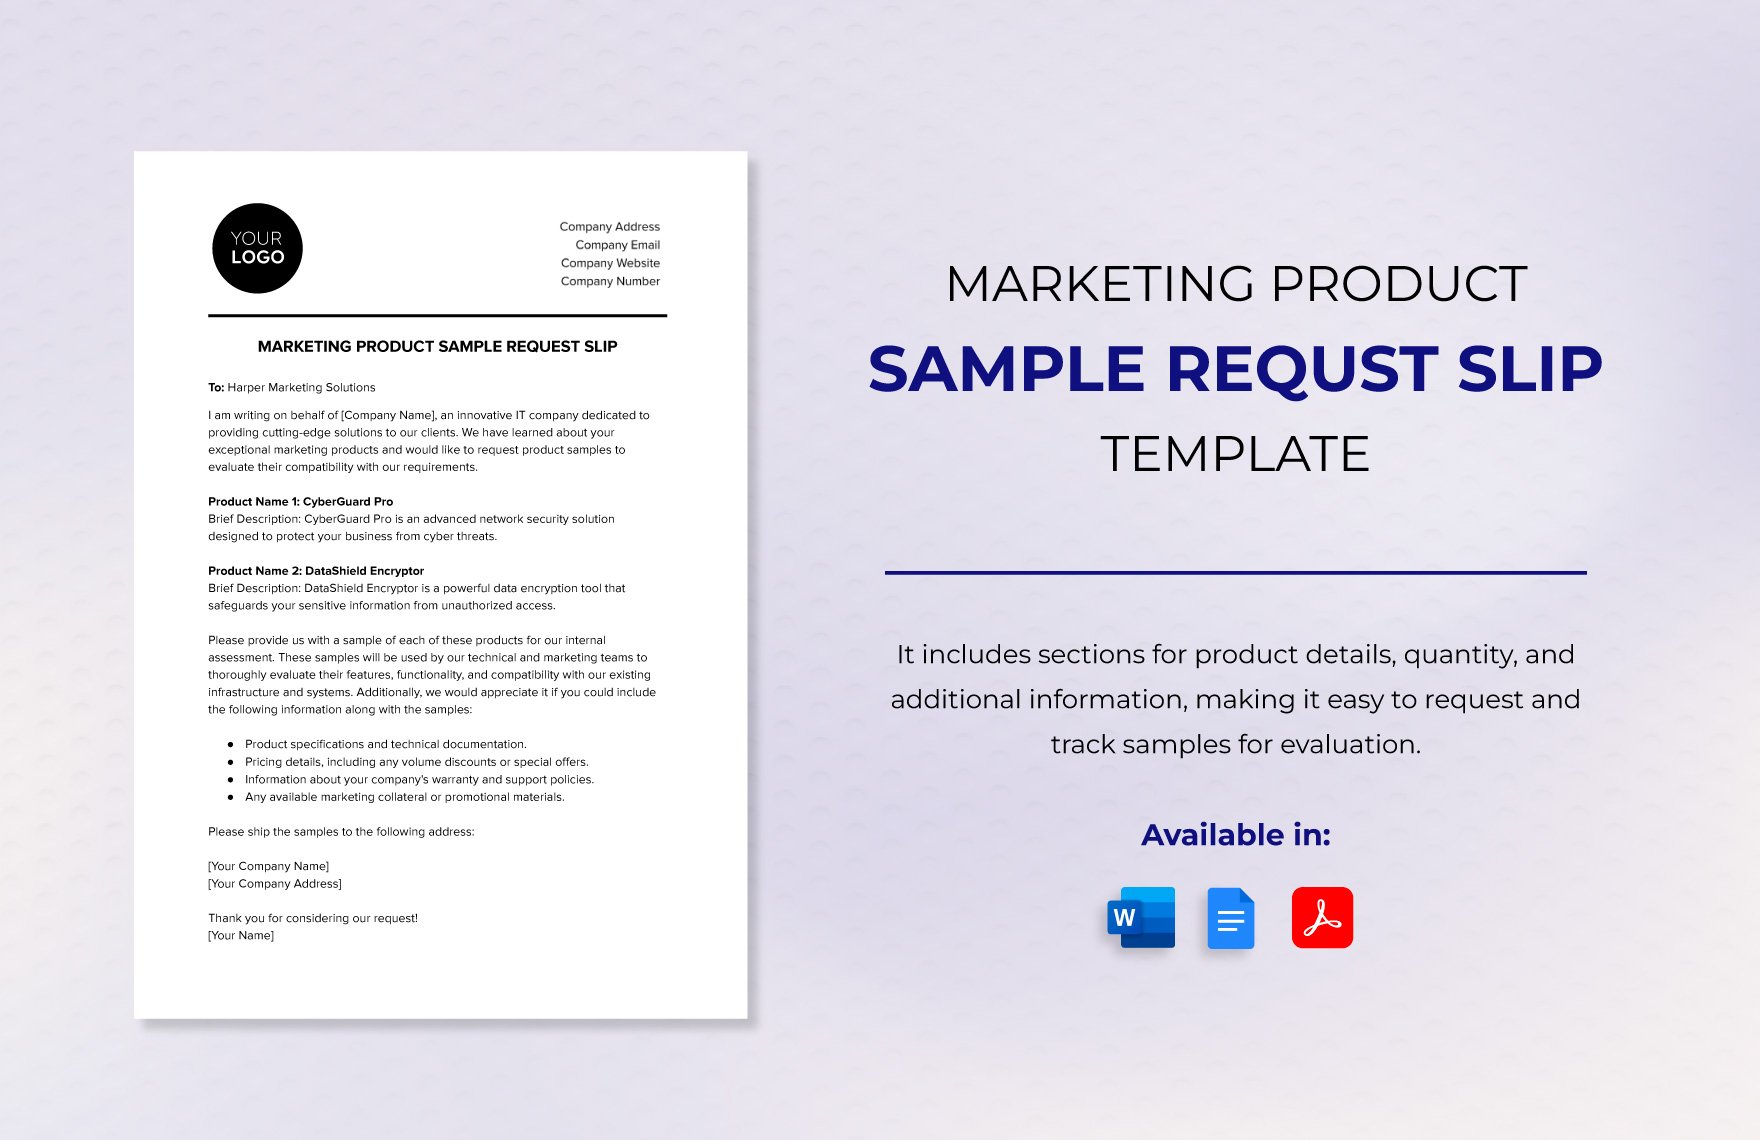 Marketing Product Sample Request Slip Template